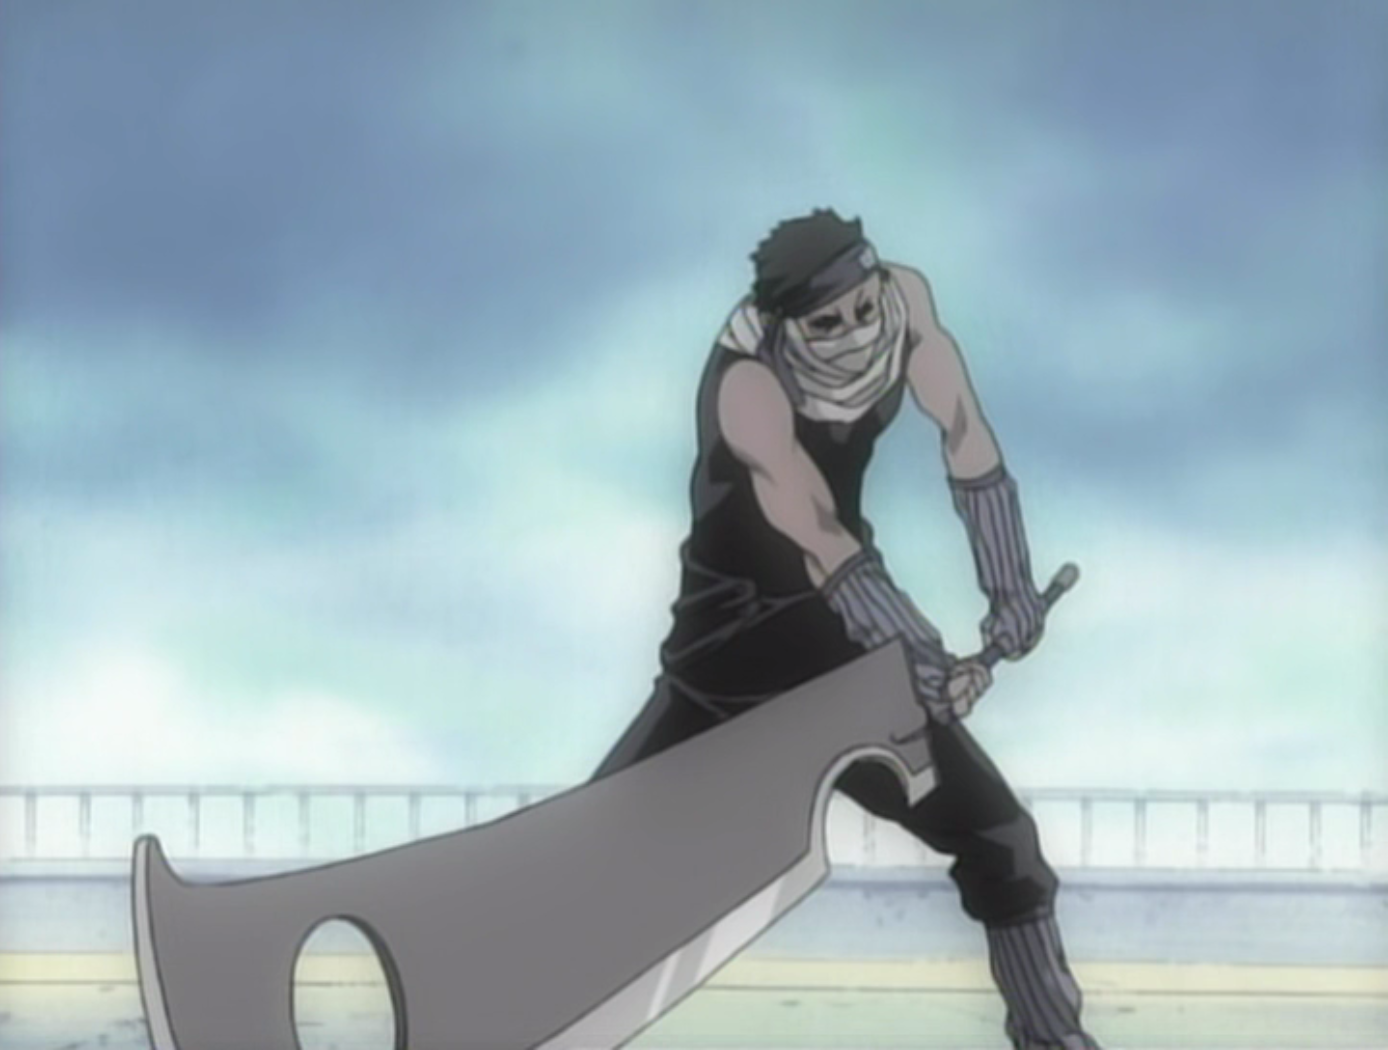 http://images4.wikia.nocookie.net/__cb20120930204860/naruto/images/6/65/Zabuza%27s_sword.png